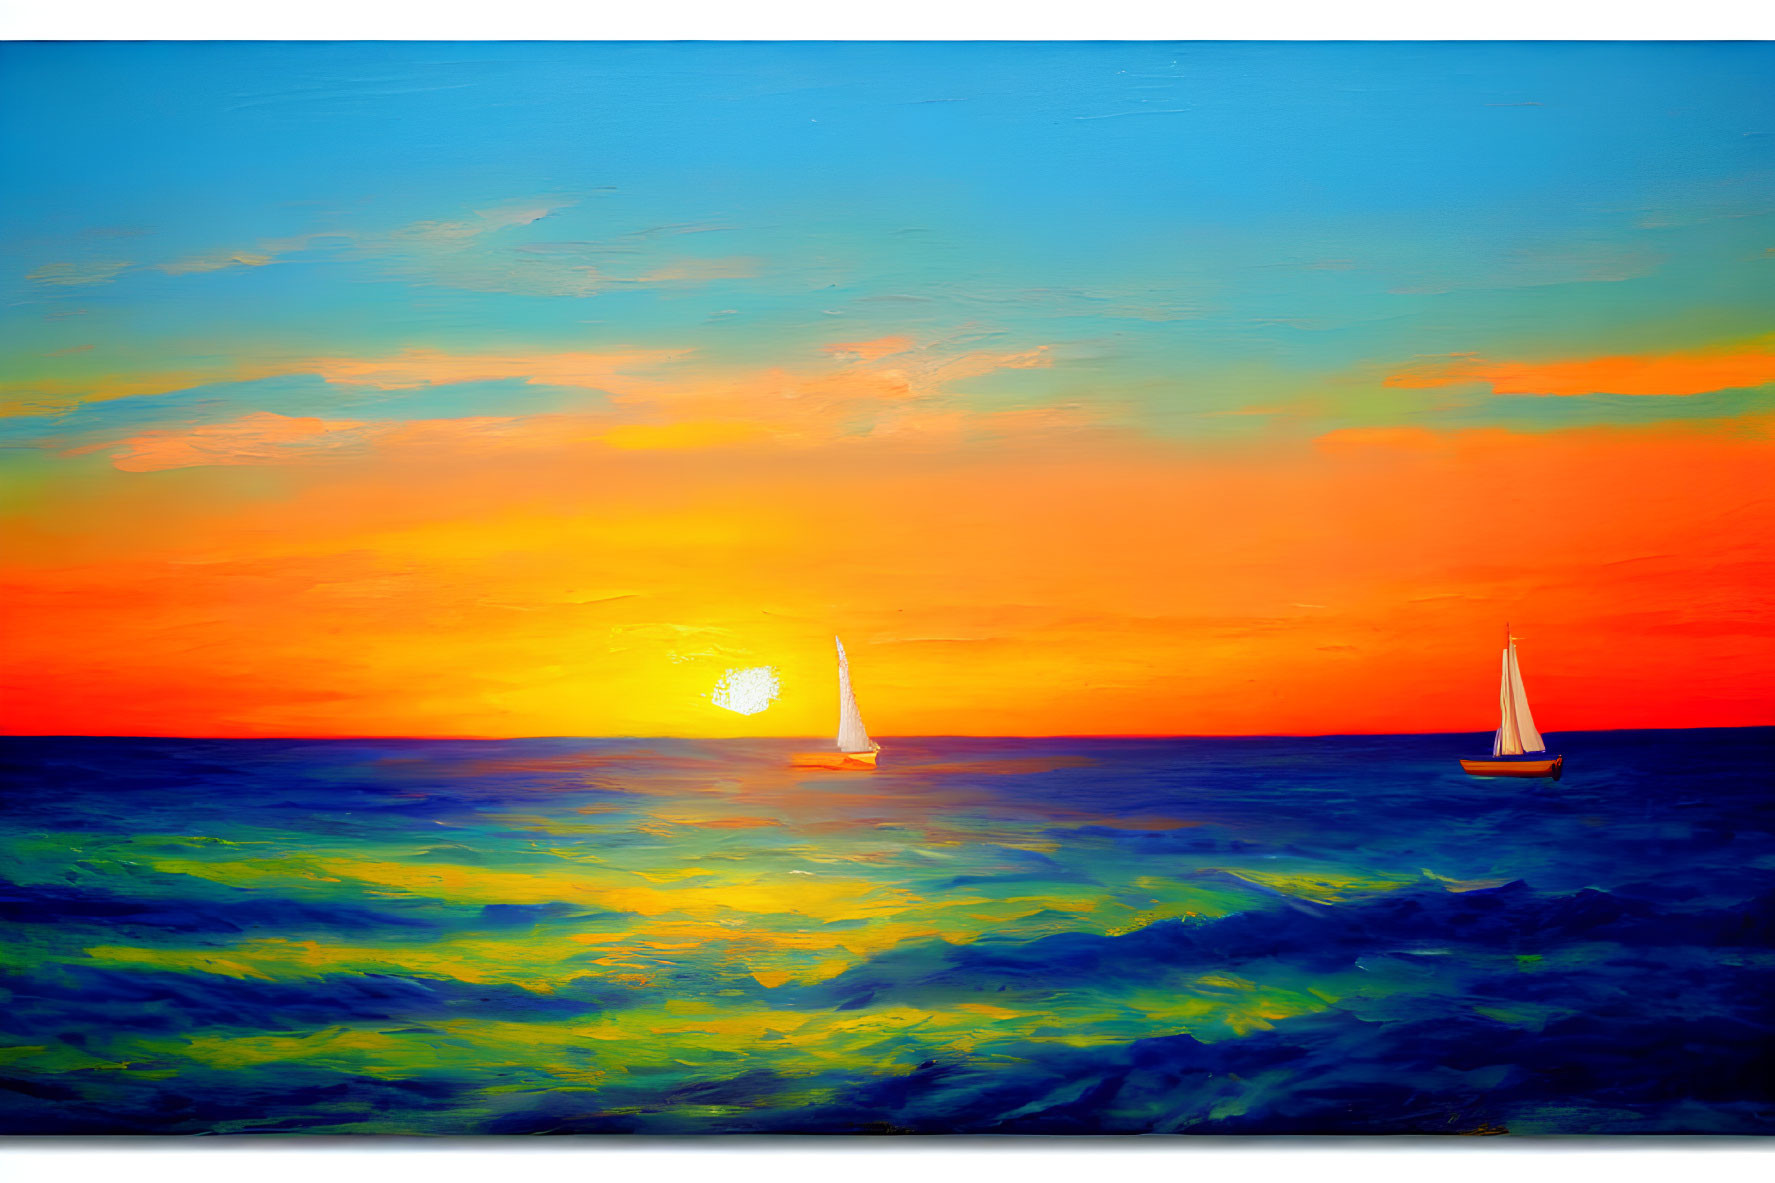 Colorful sunset painting with sailboats on dark blue sea